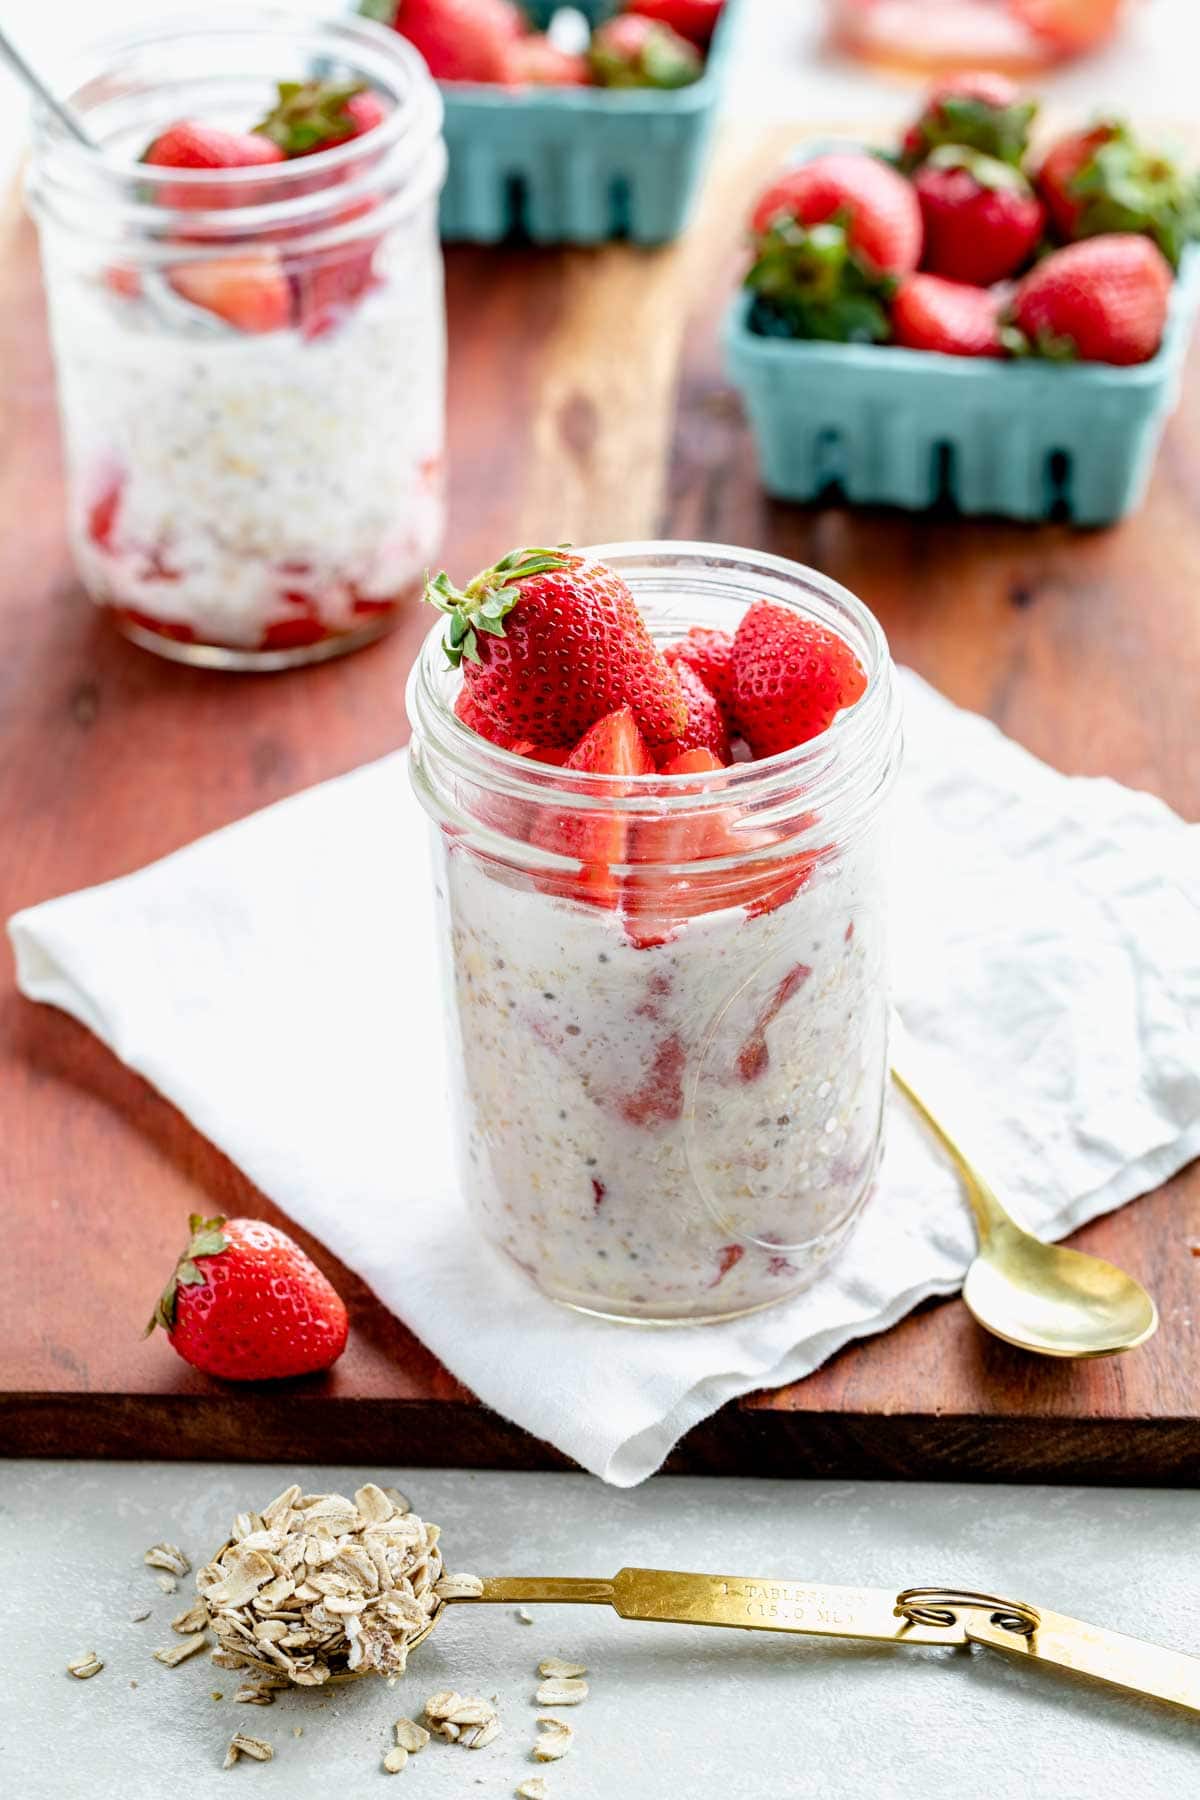 a focus on one mason jar full of overnight oats garnished with strawberries, with a gold spoon and strawberry in the foreground, and another mason jar of oats and some blue crates of strawberries in the background